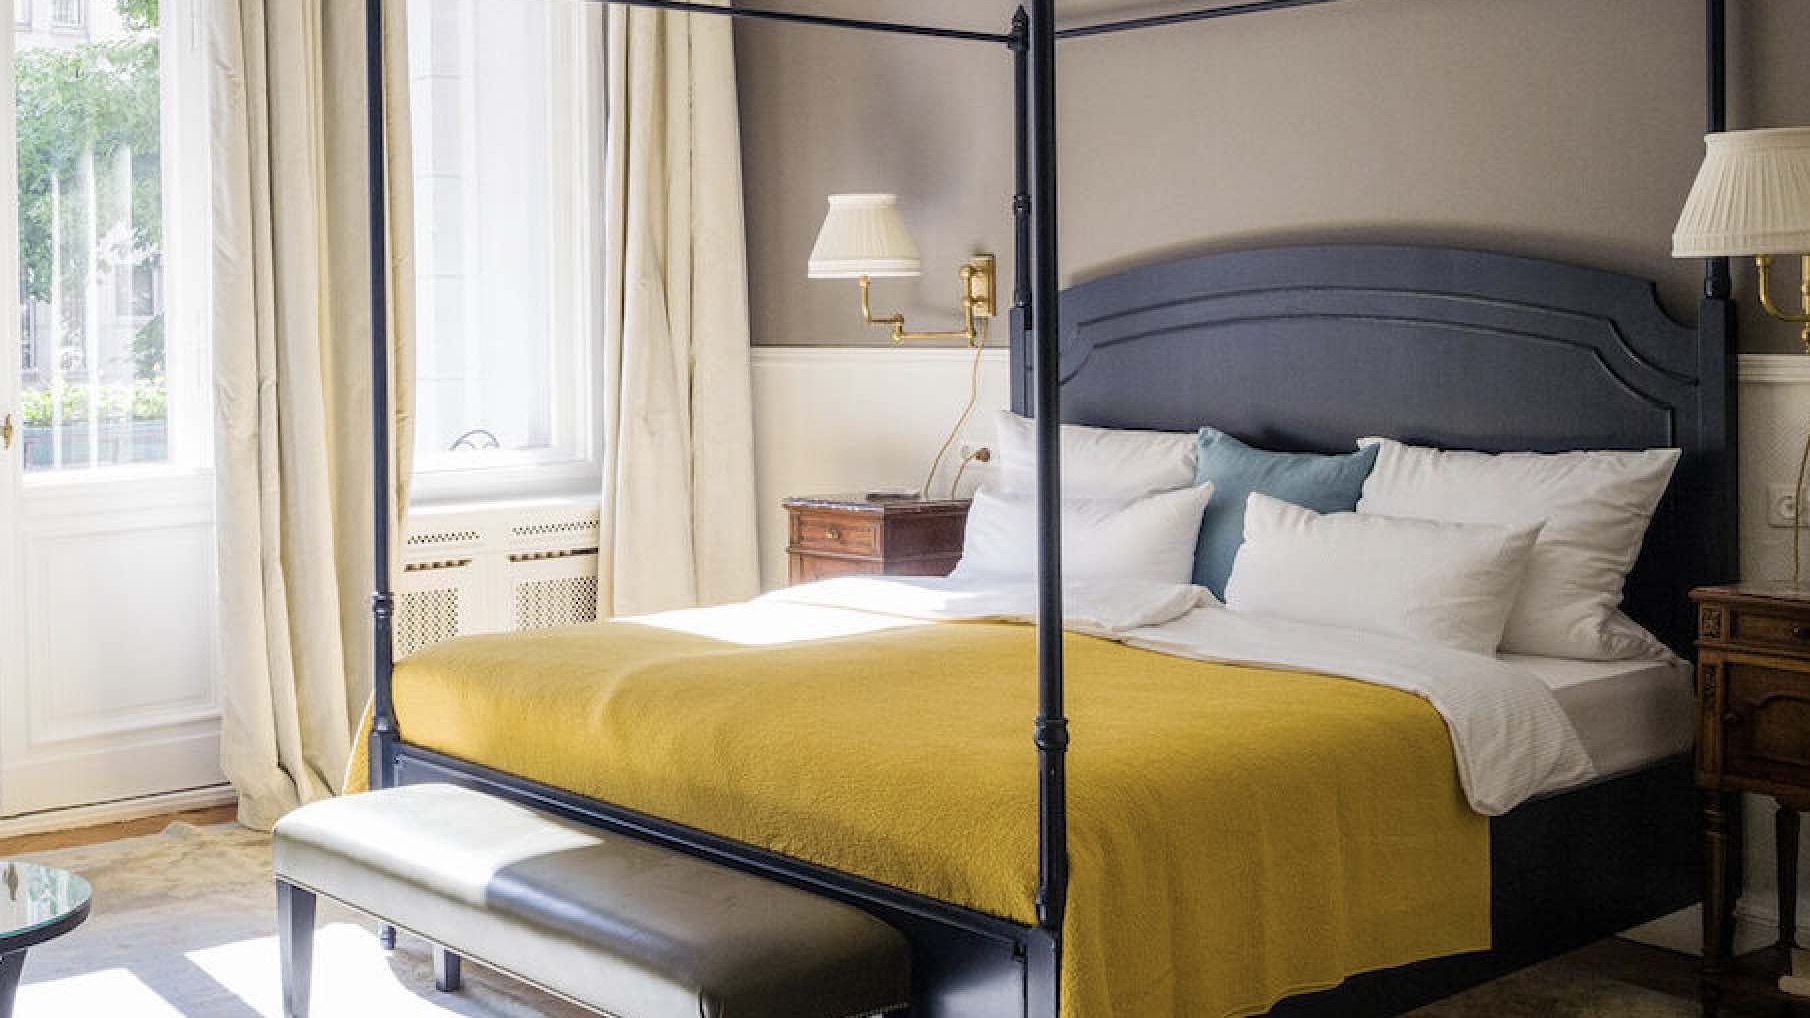 The historic Henri Hotel is an ideal location for exploring Berlin's luxury shops and exclusive boutiques (Photo courtesy Henri Hotel Berlin) Kurfürstendamm